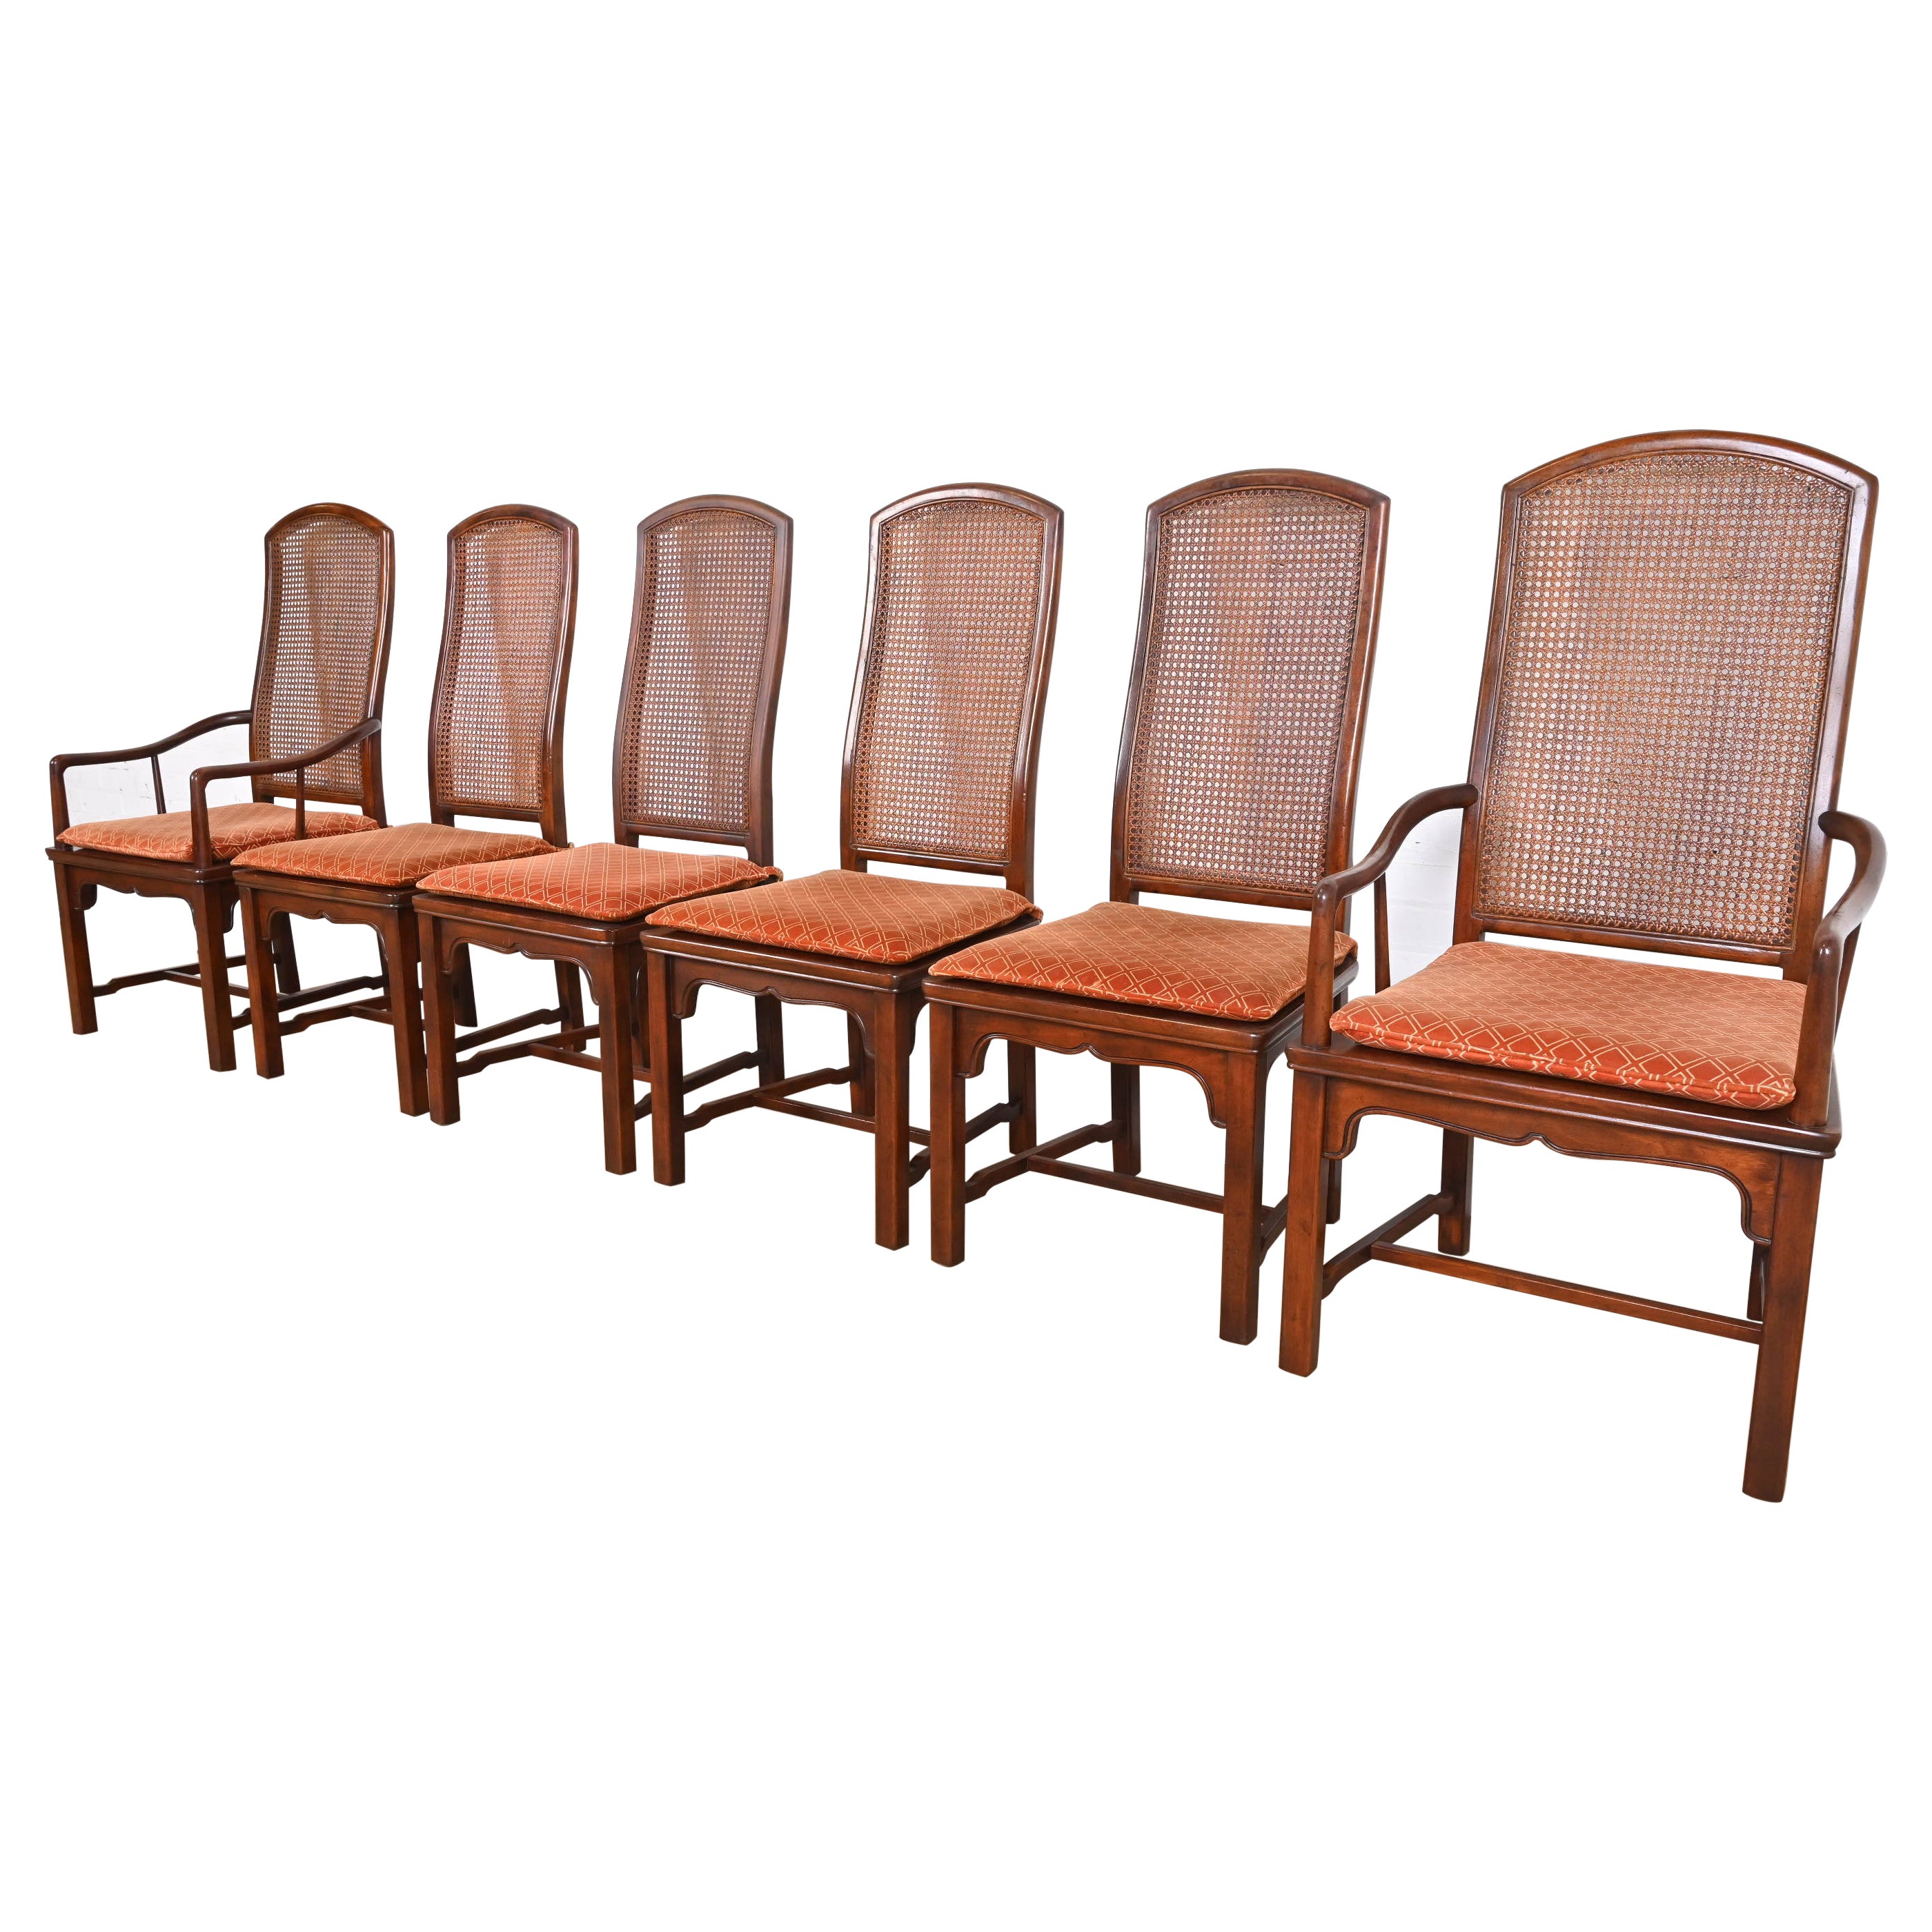 Henredon Hollywood Regency Chinoiserie Sculpted Mahogany Dining Chairs, Set of 6 For Sale